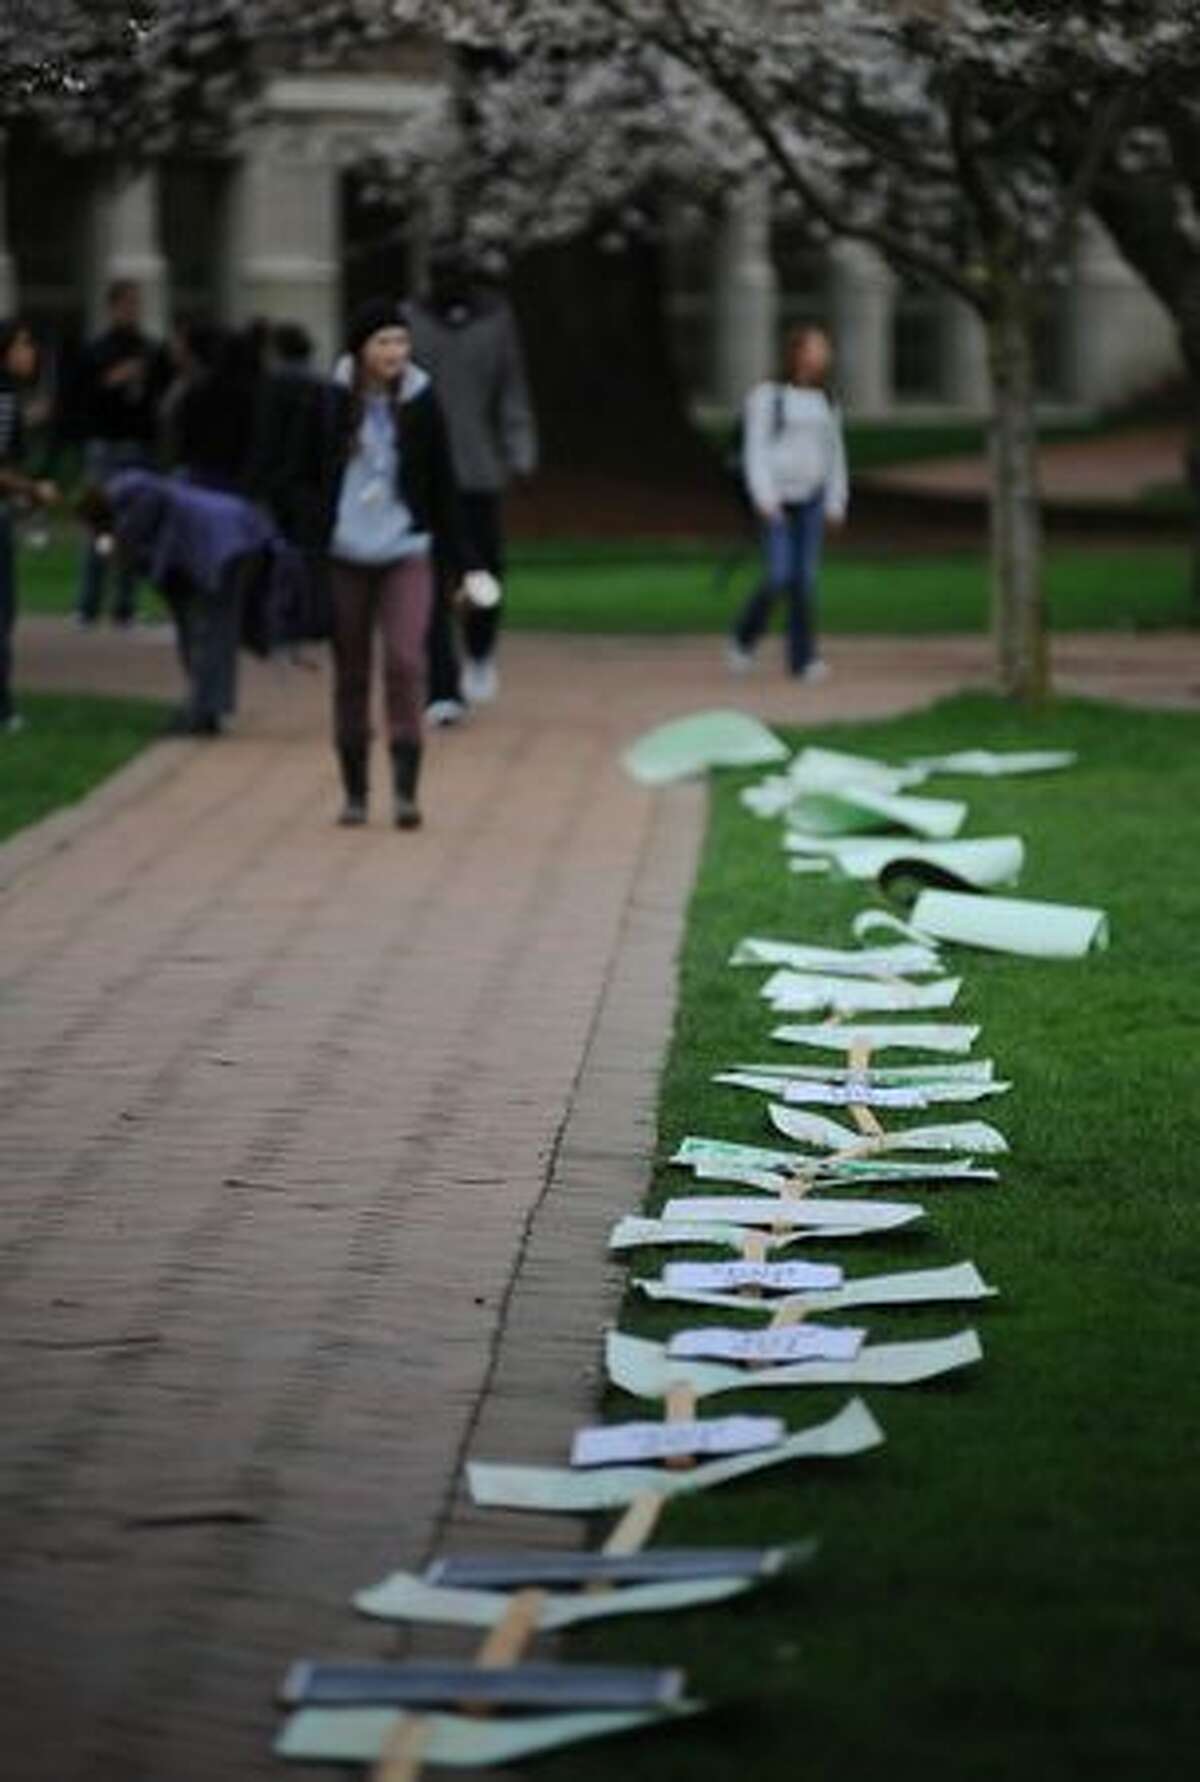 Picket signs line the grass lawn in the Quad.